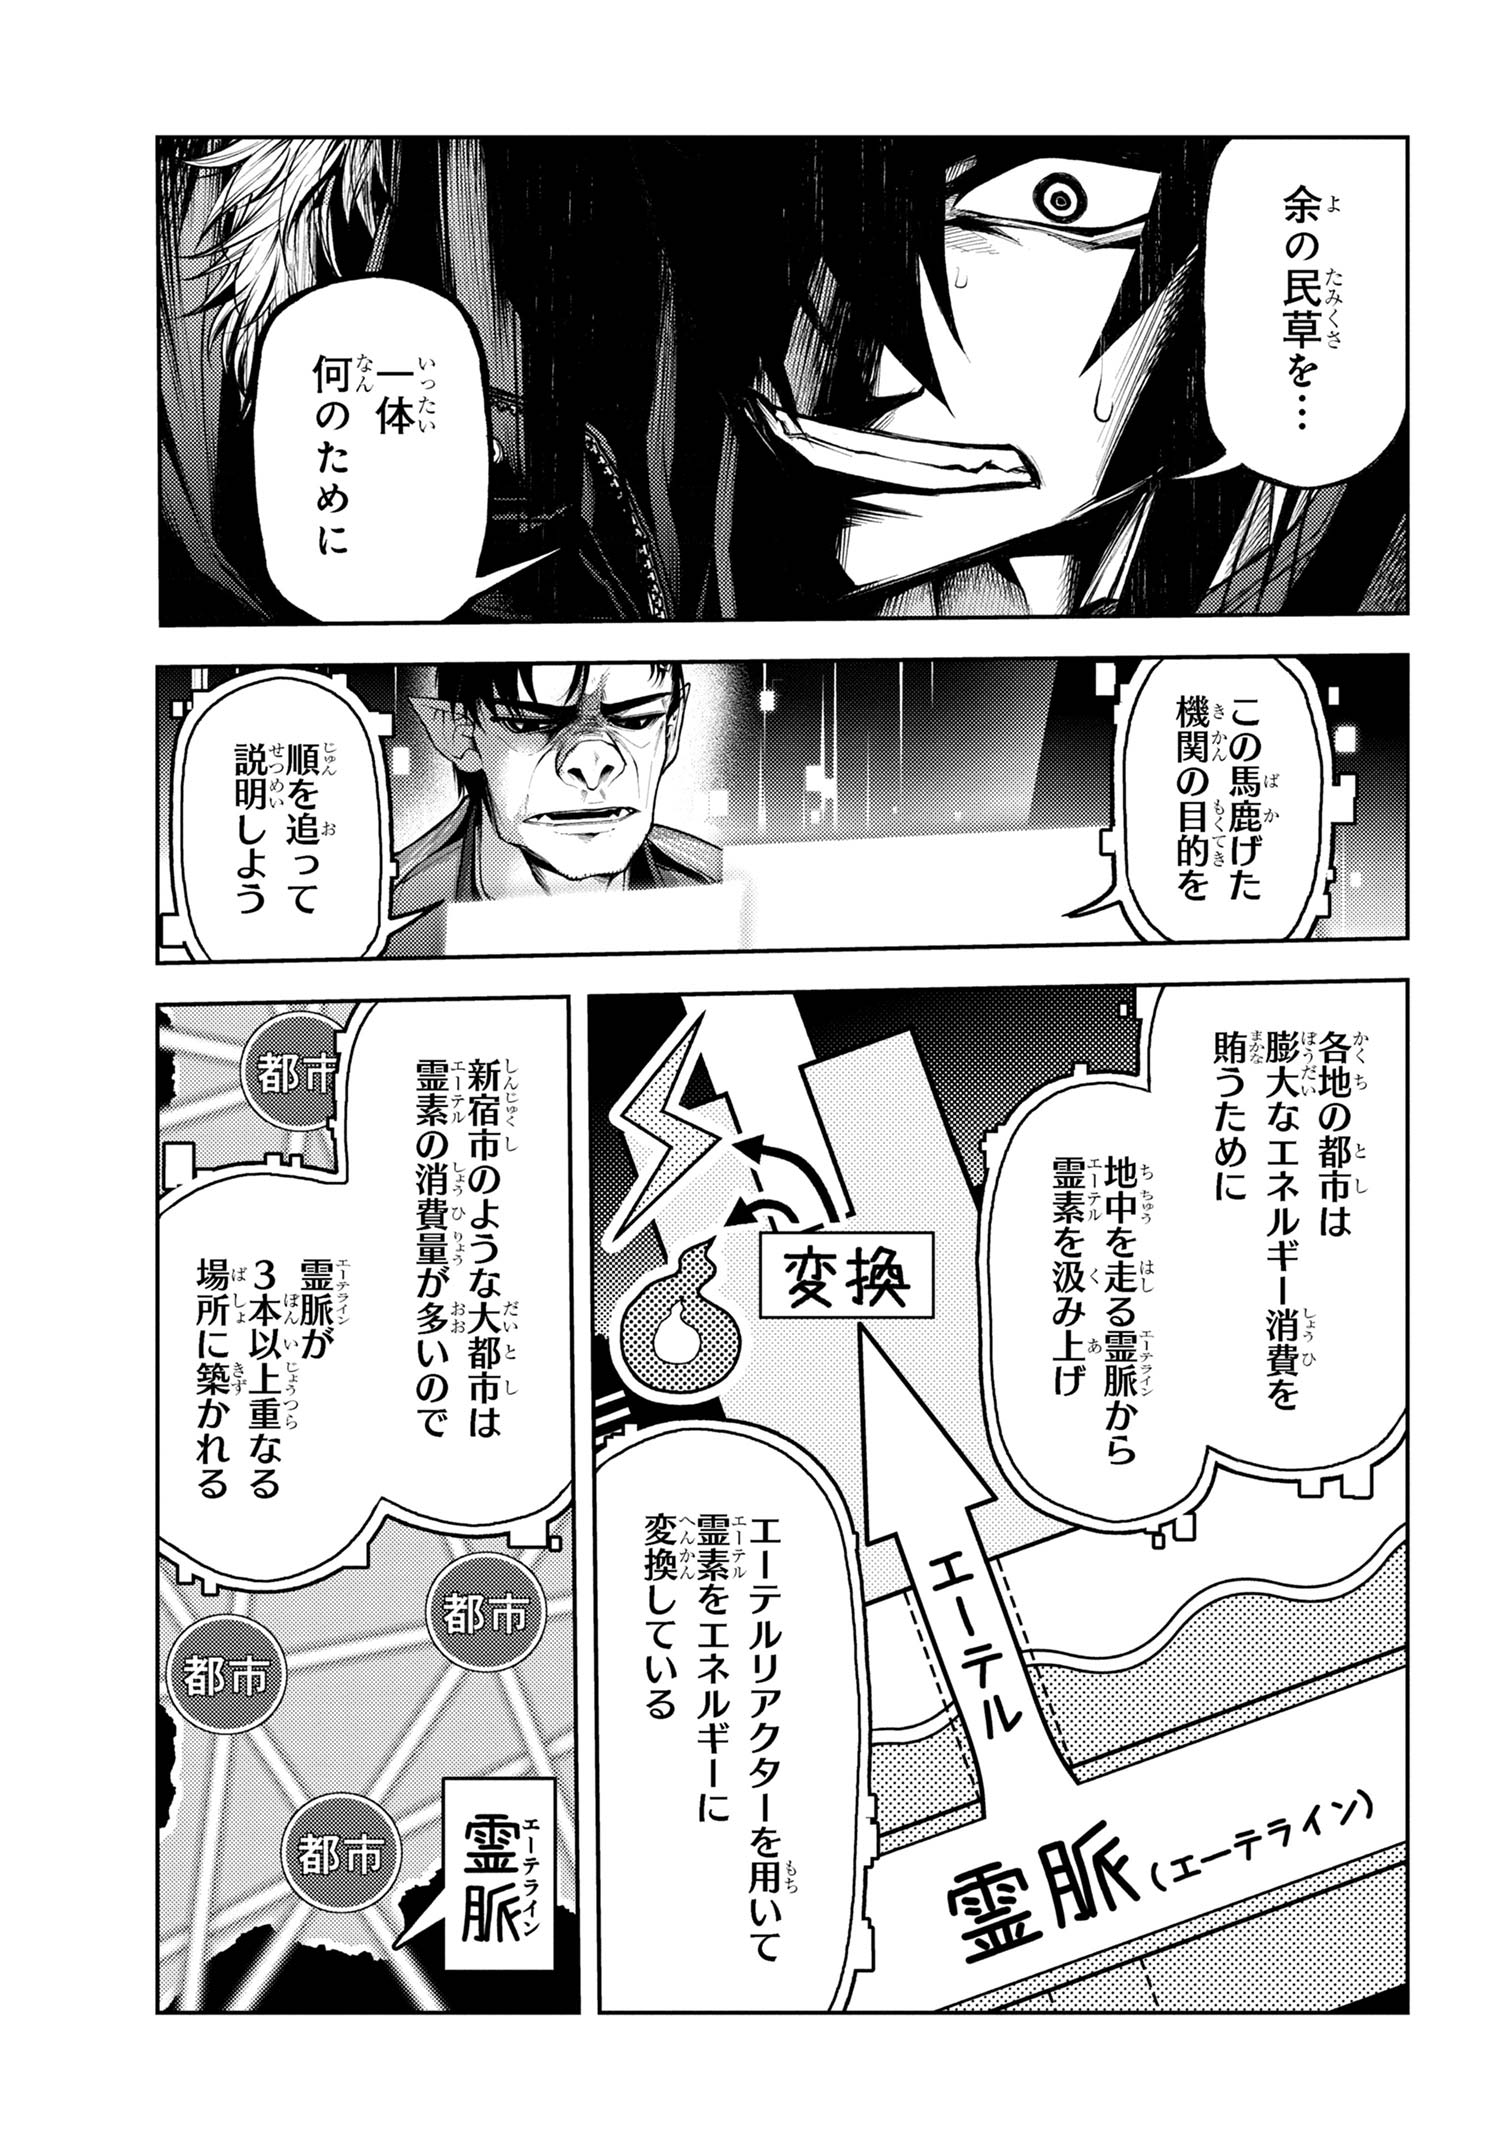 Maou 2099 - Chapter 7.2 - Page 4